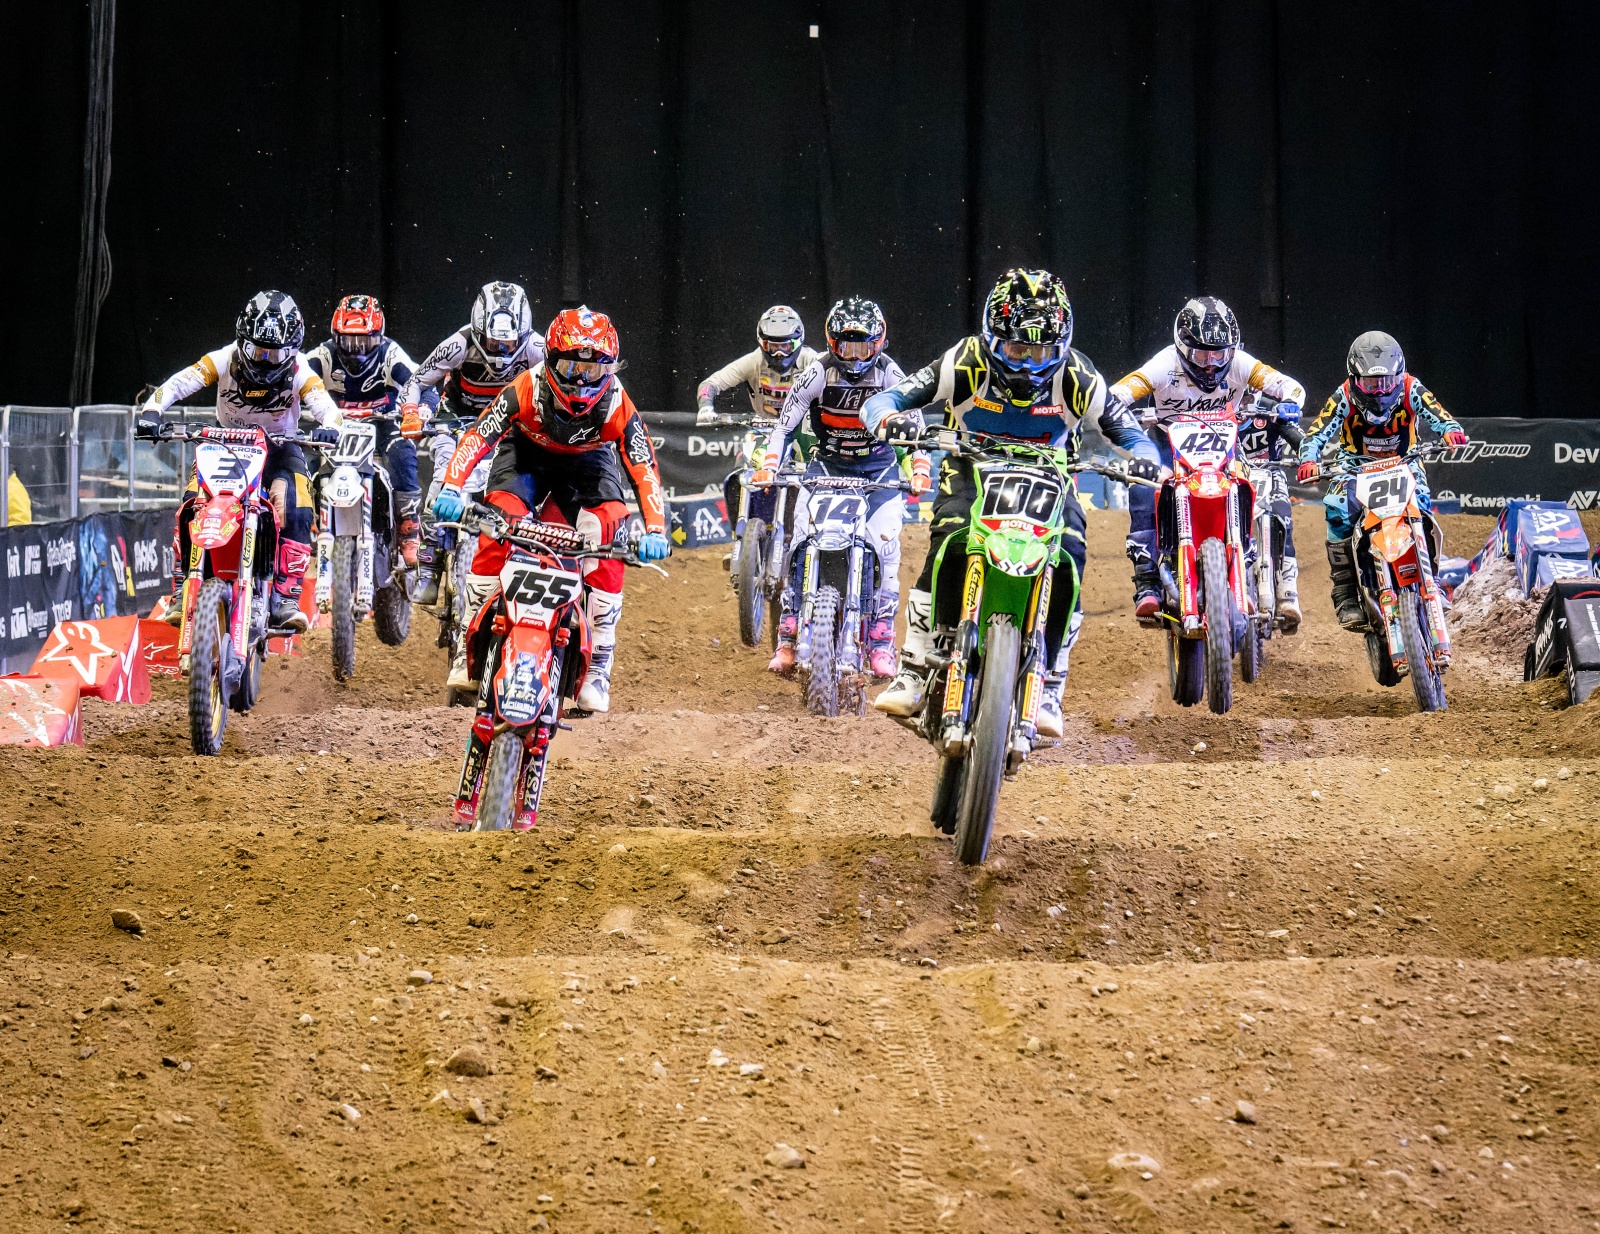 Arenacross is going to the wire in Wembley